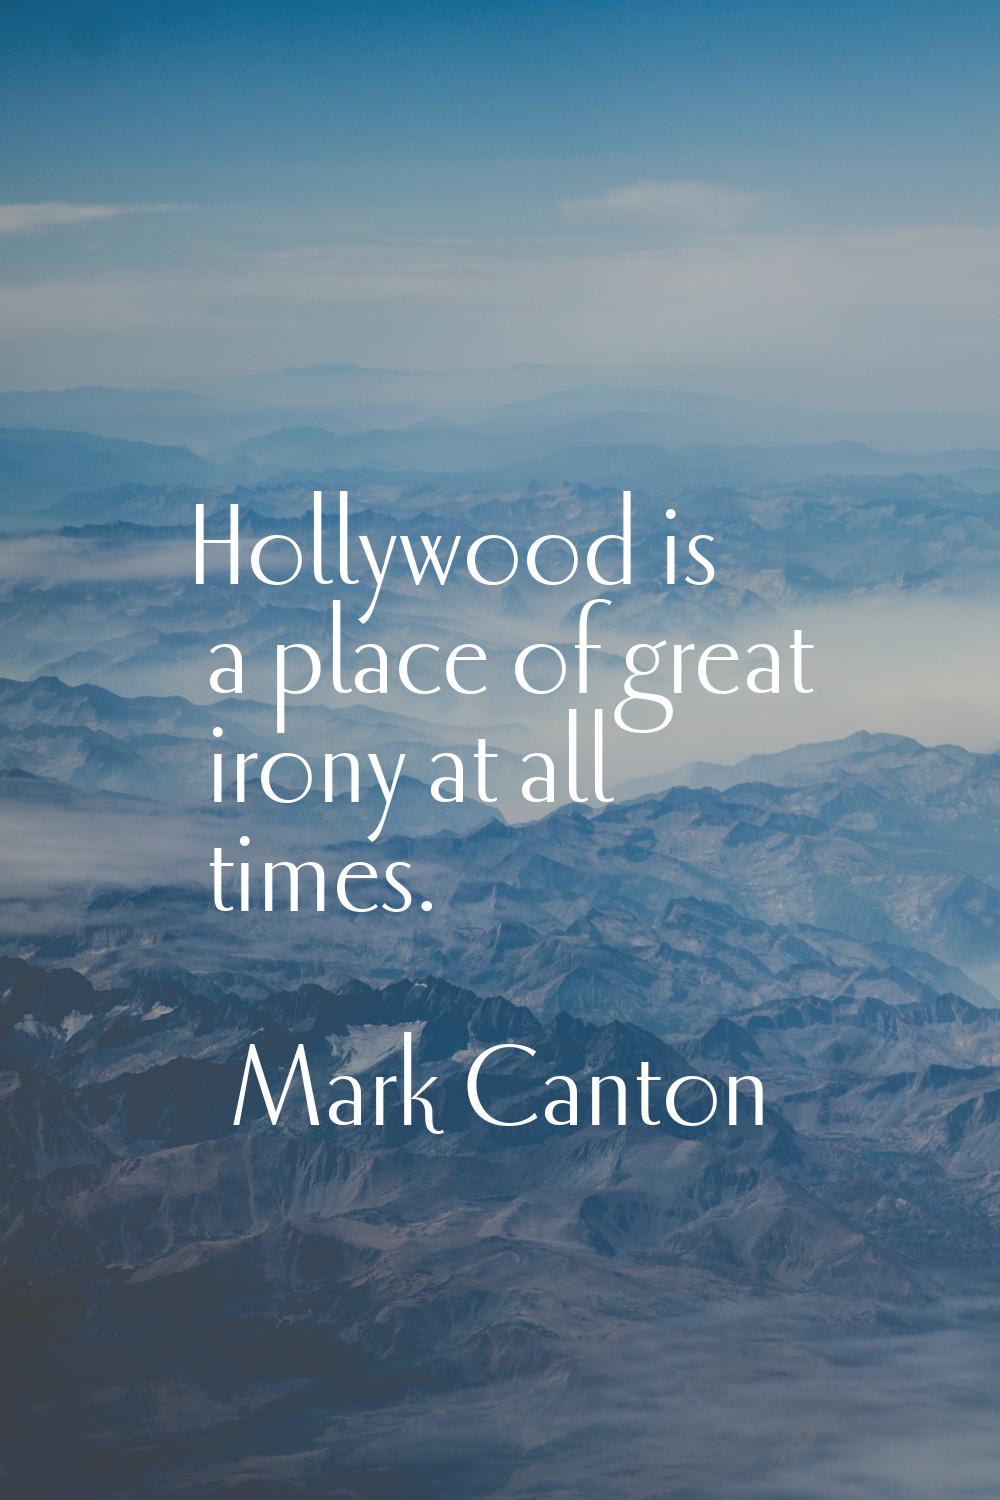 Hollywood is a place of great irony at all times.